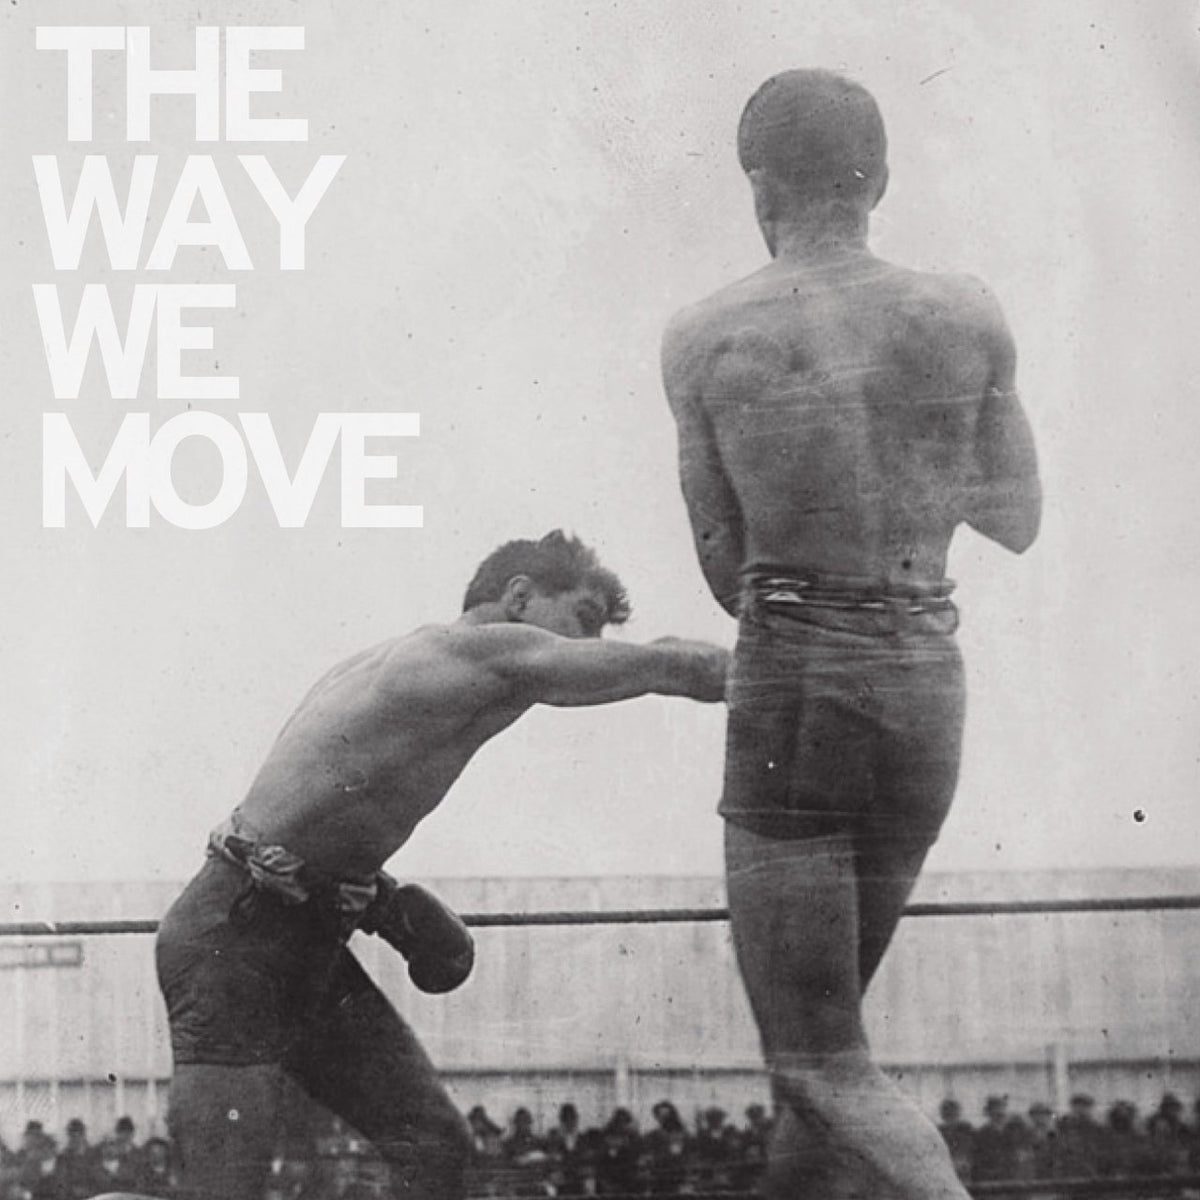 Langhorne Slim & The Law - The Way We Move